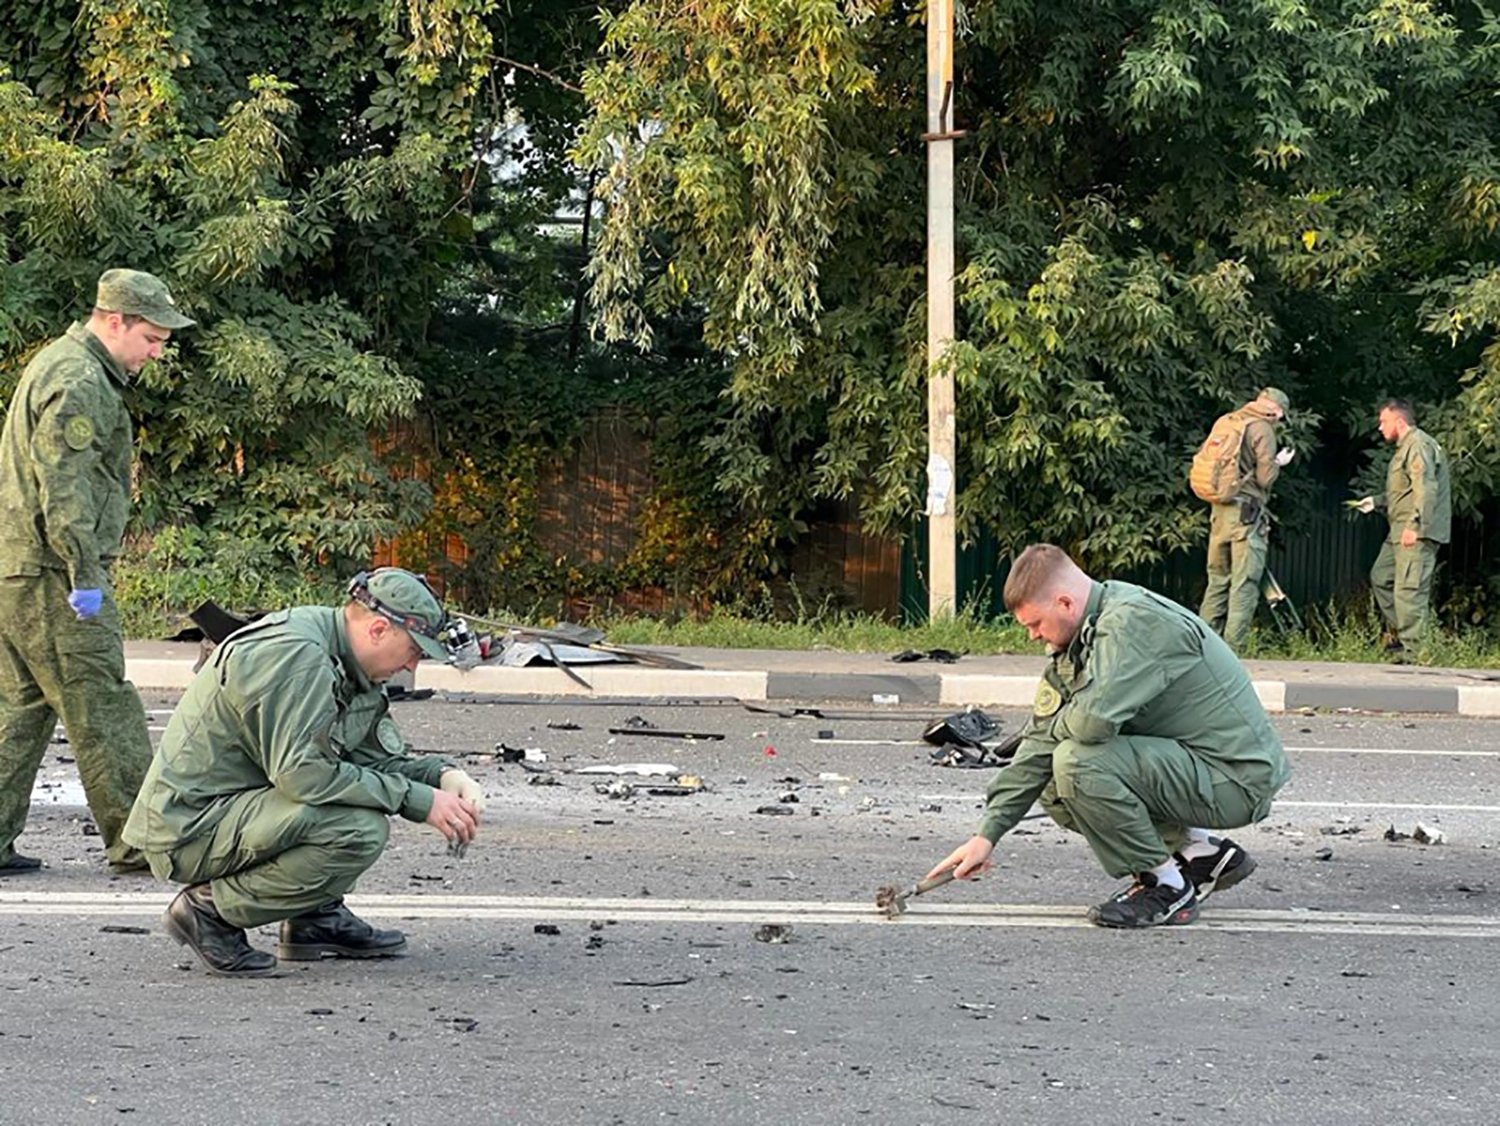 Investigators work at the place of an explosion of a car driven by Daria Dugina, the daughter of Alexader Dugin, a hardline Russian ideologue close to President Vladimir Putin, outside Moscow, Russia, Aug. 21, 2022. (AFP Photo)